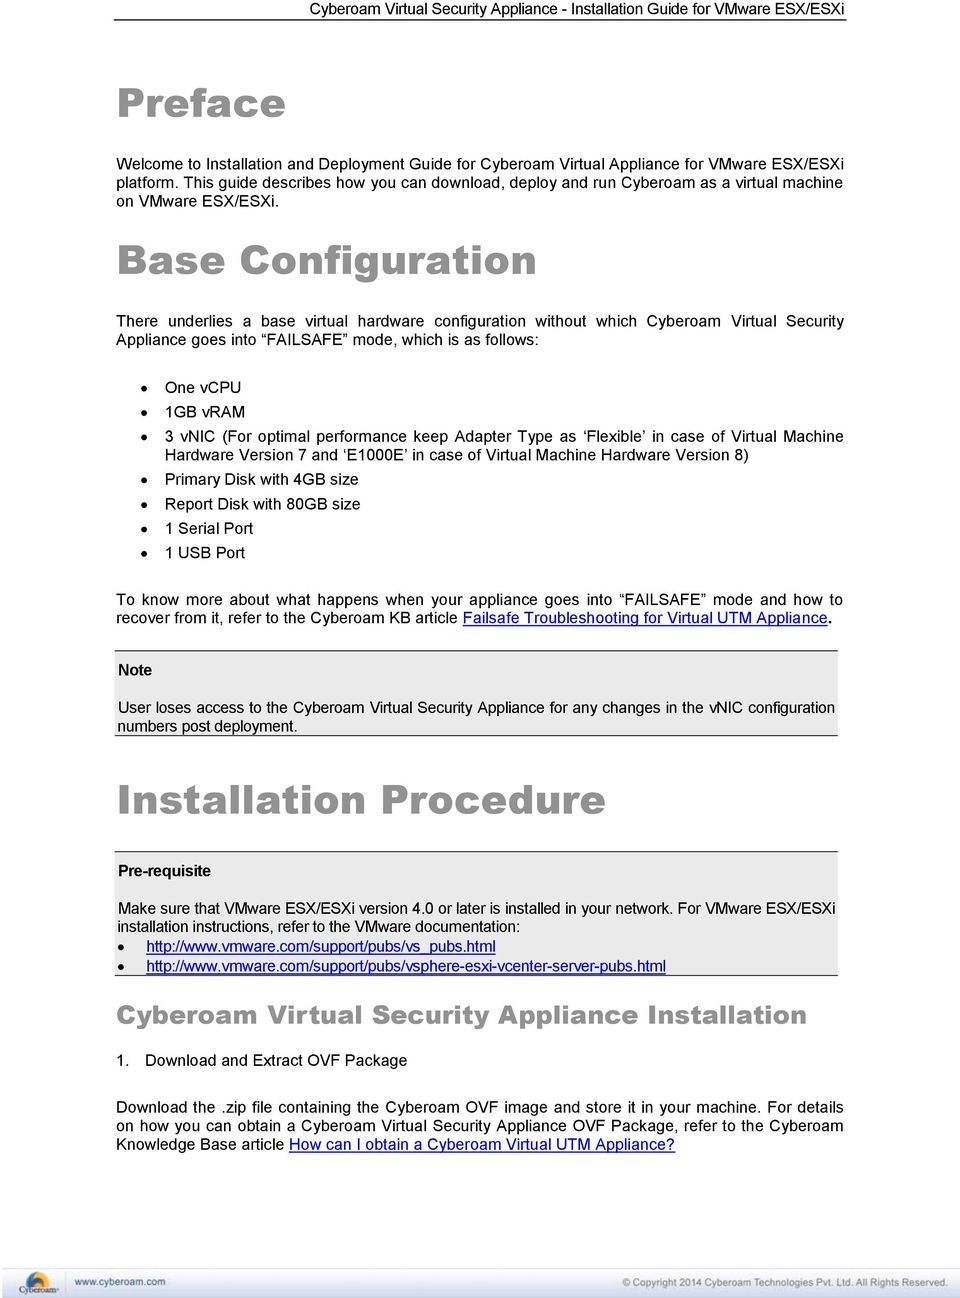 Base Configuration There underlies a base virtual hardware configuration without which Cyberoam Virtual Security Appliance goes into FAILSAFE mode, which is as follows: One vcpu 1GB vram 3 vnic (For